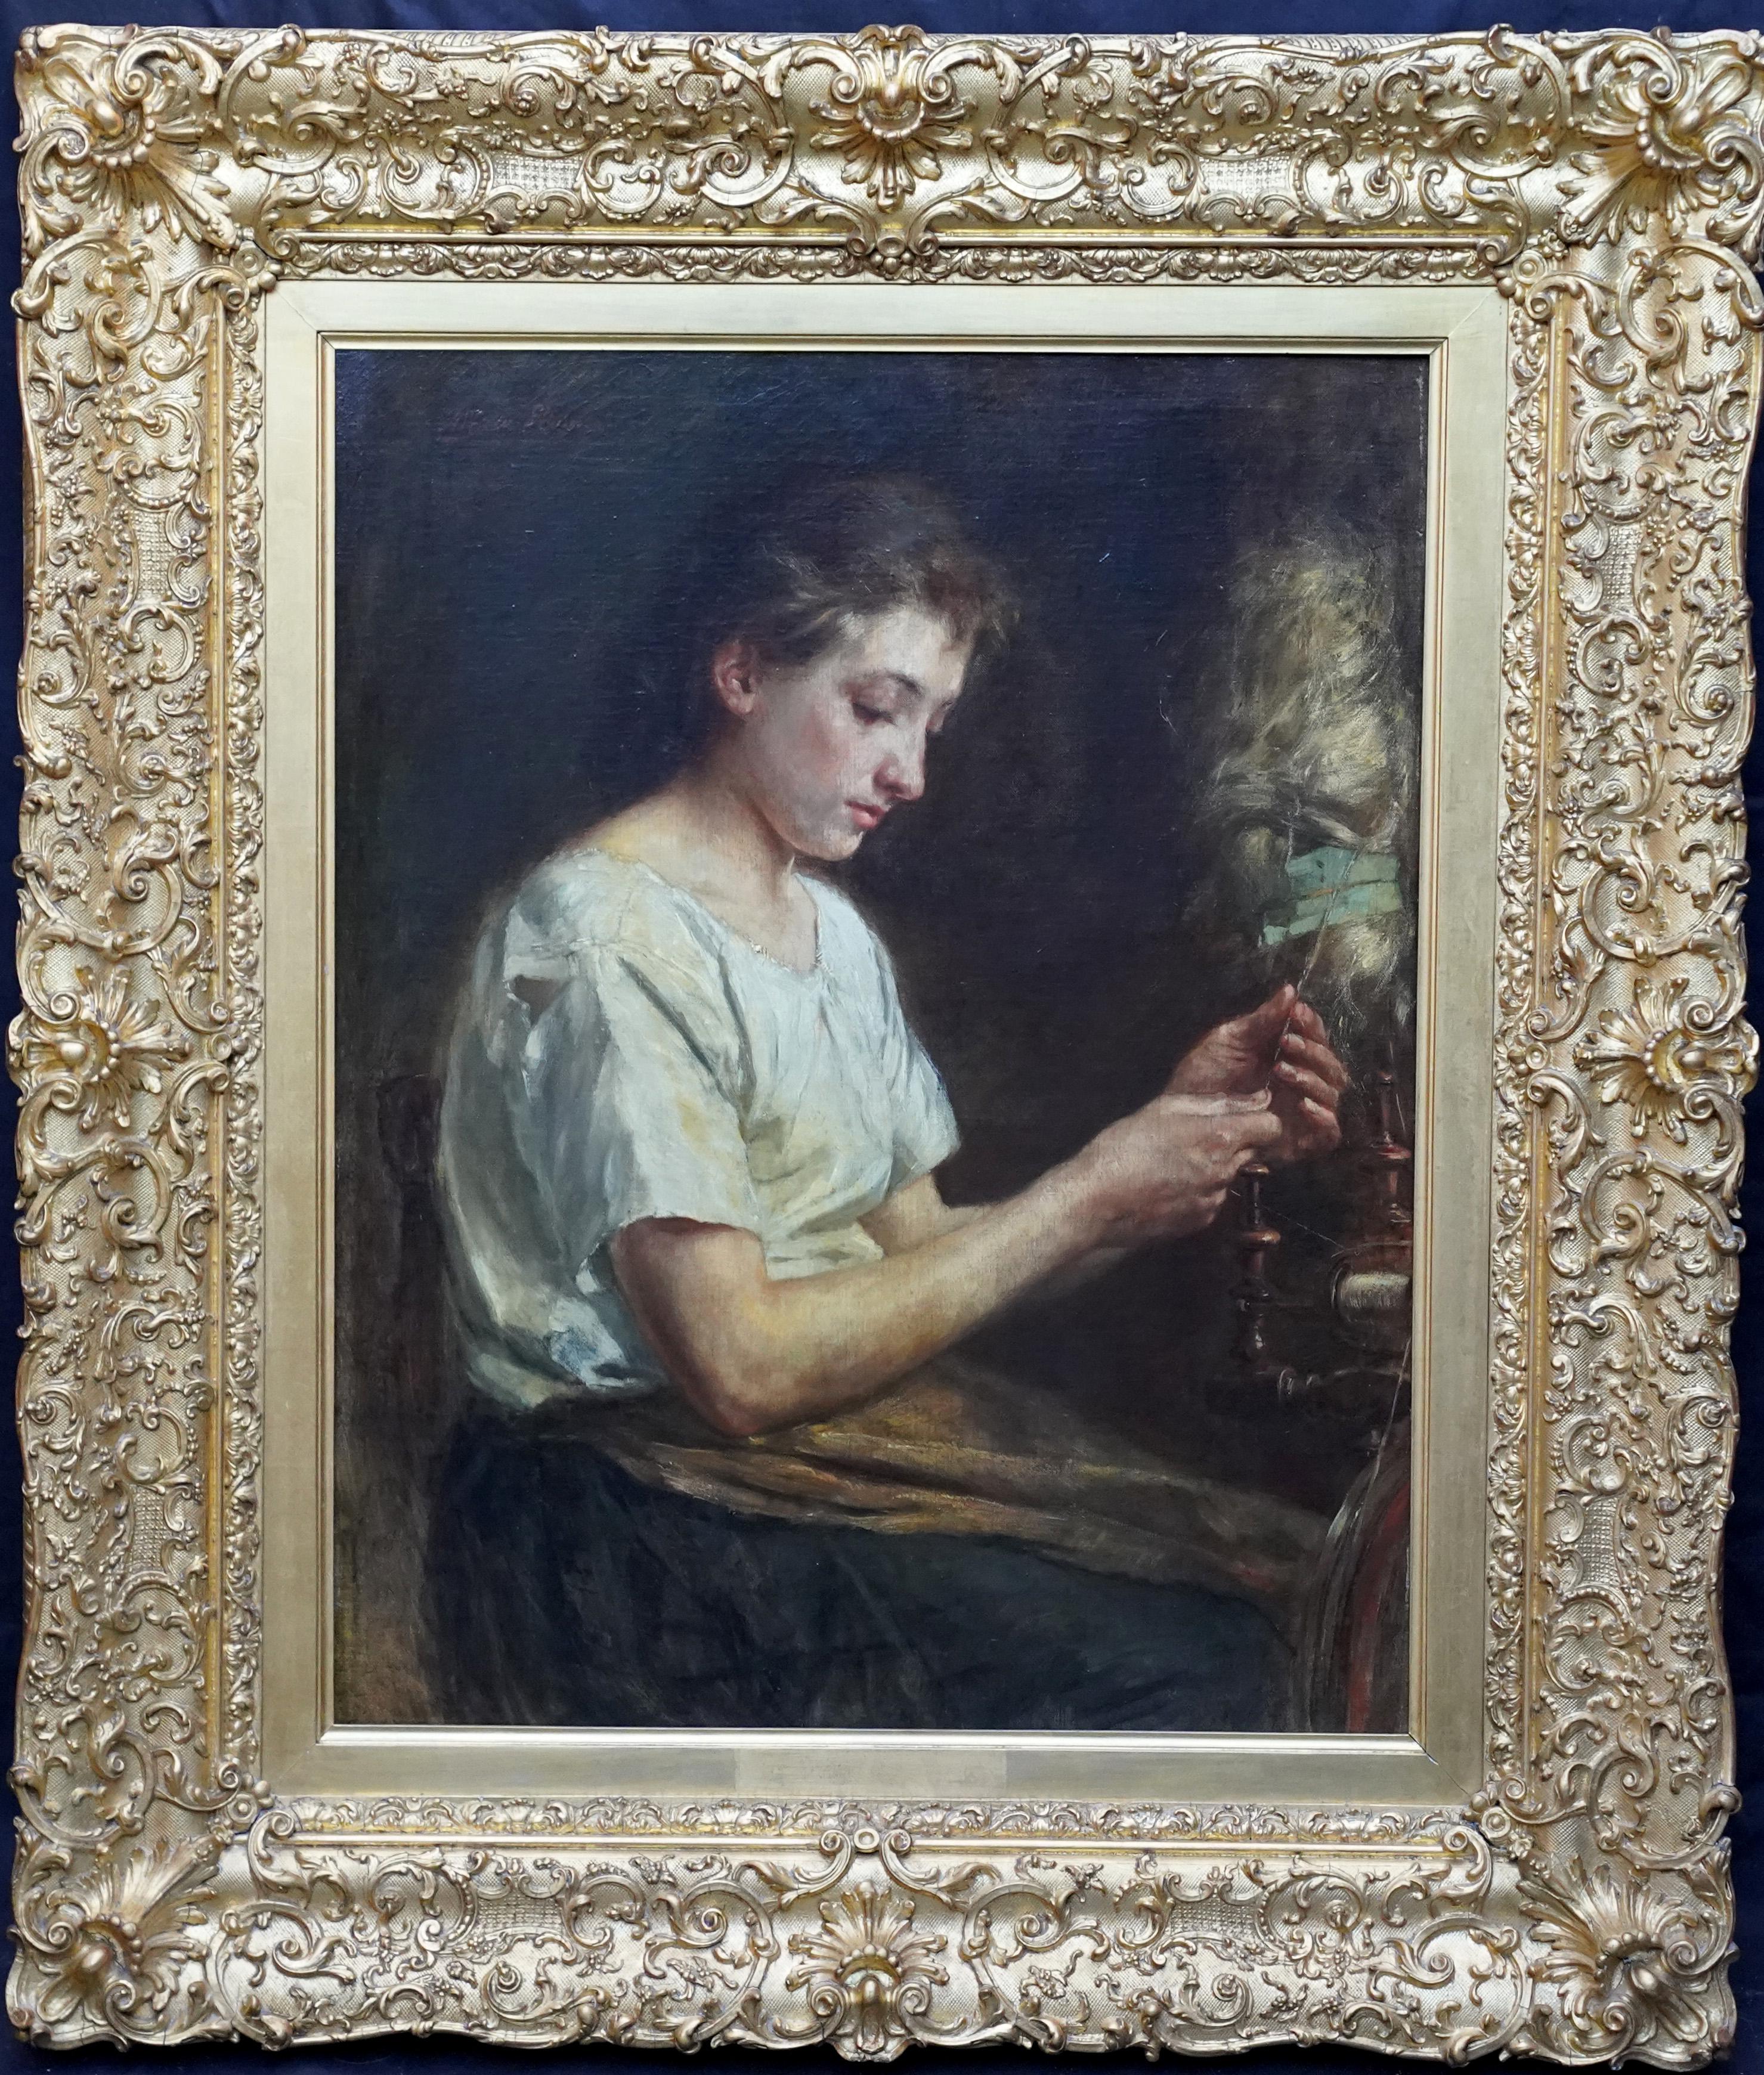 The Flax Spinner - Belgian Victorian art female portrait oil painting craftwork